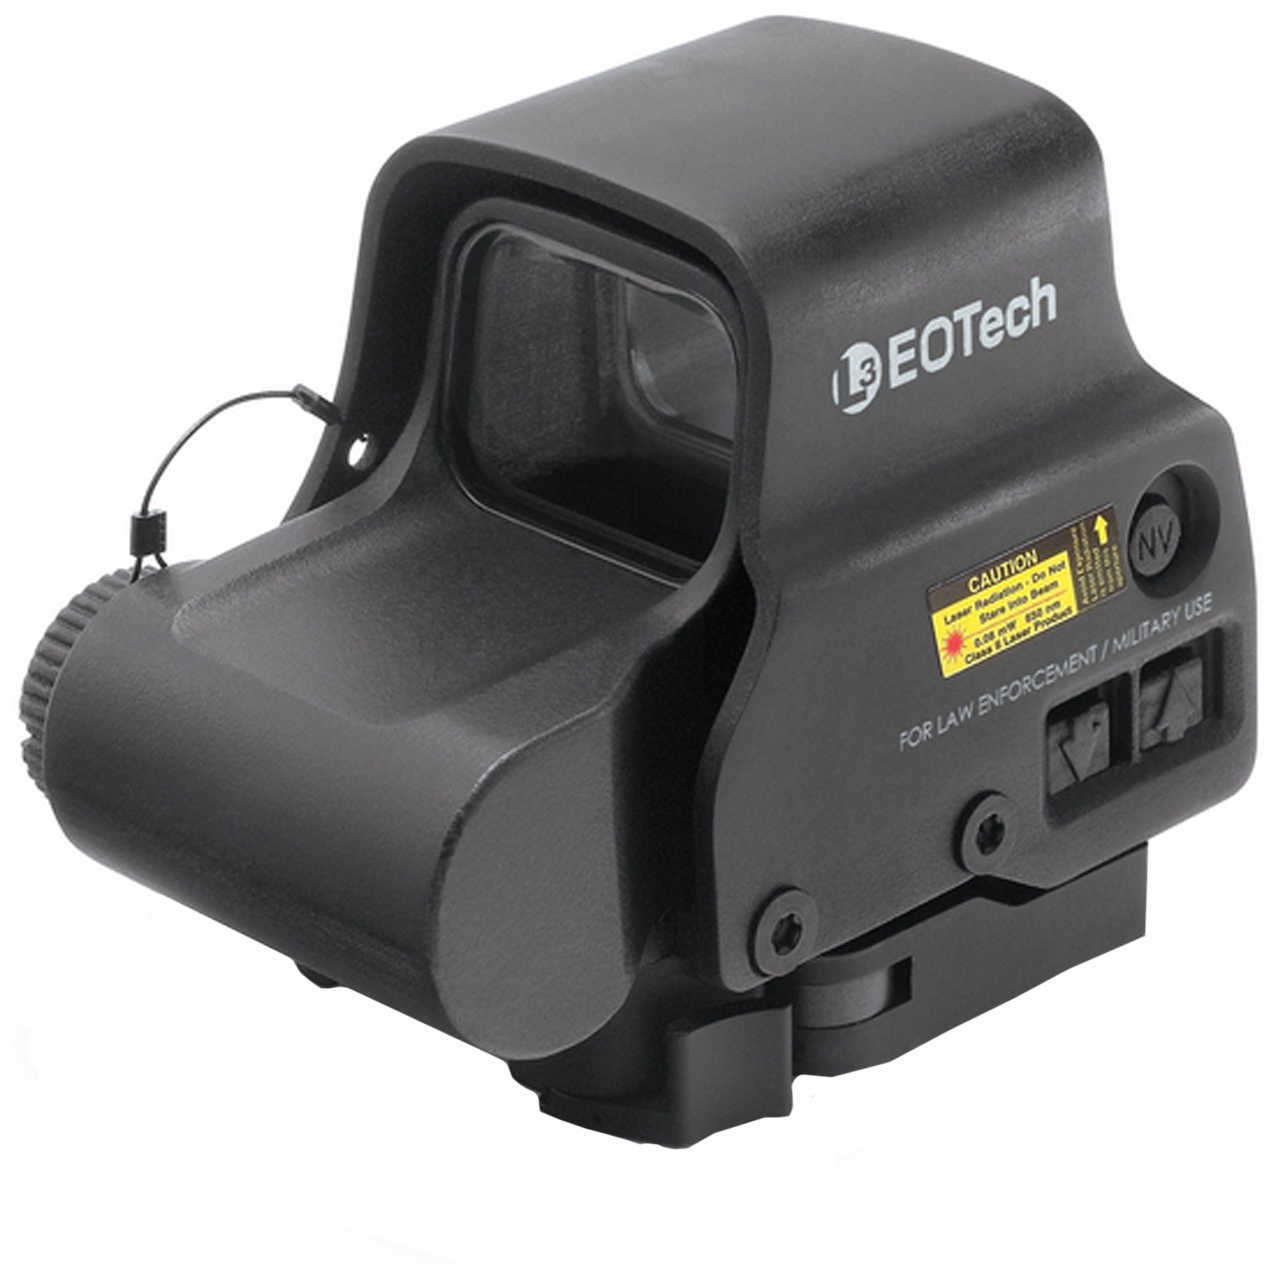 EOTech EXPS3-0 Holographic Red Dot Sight Black 68MOA Ring with 1MOA CR123 Battery